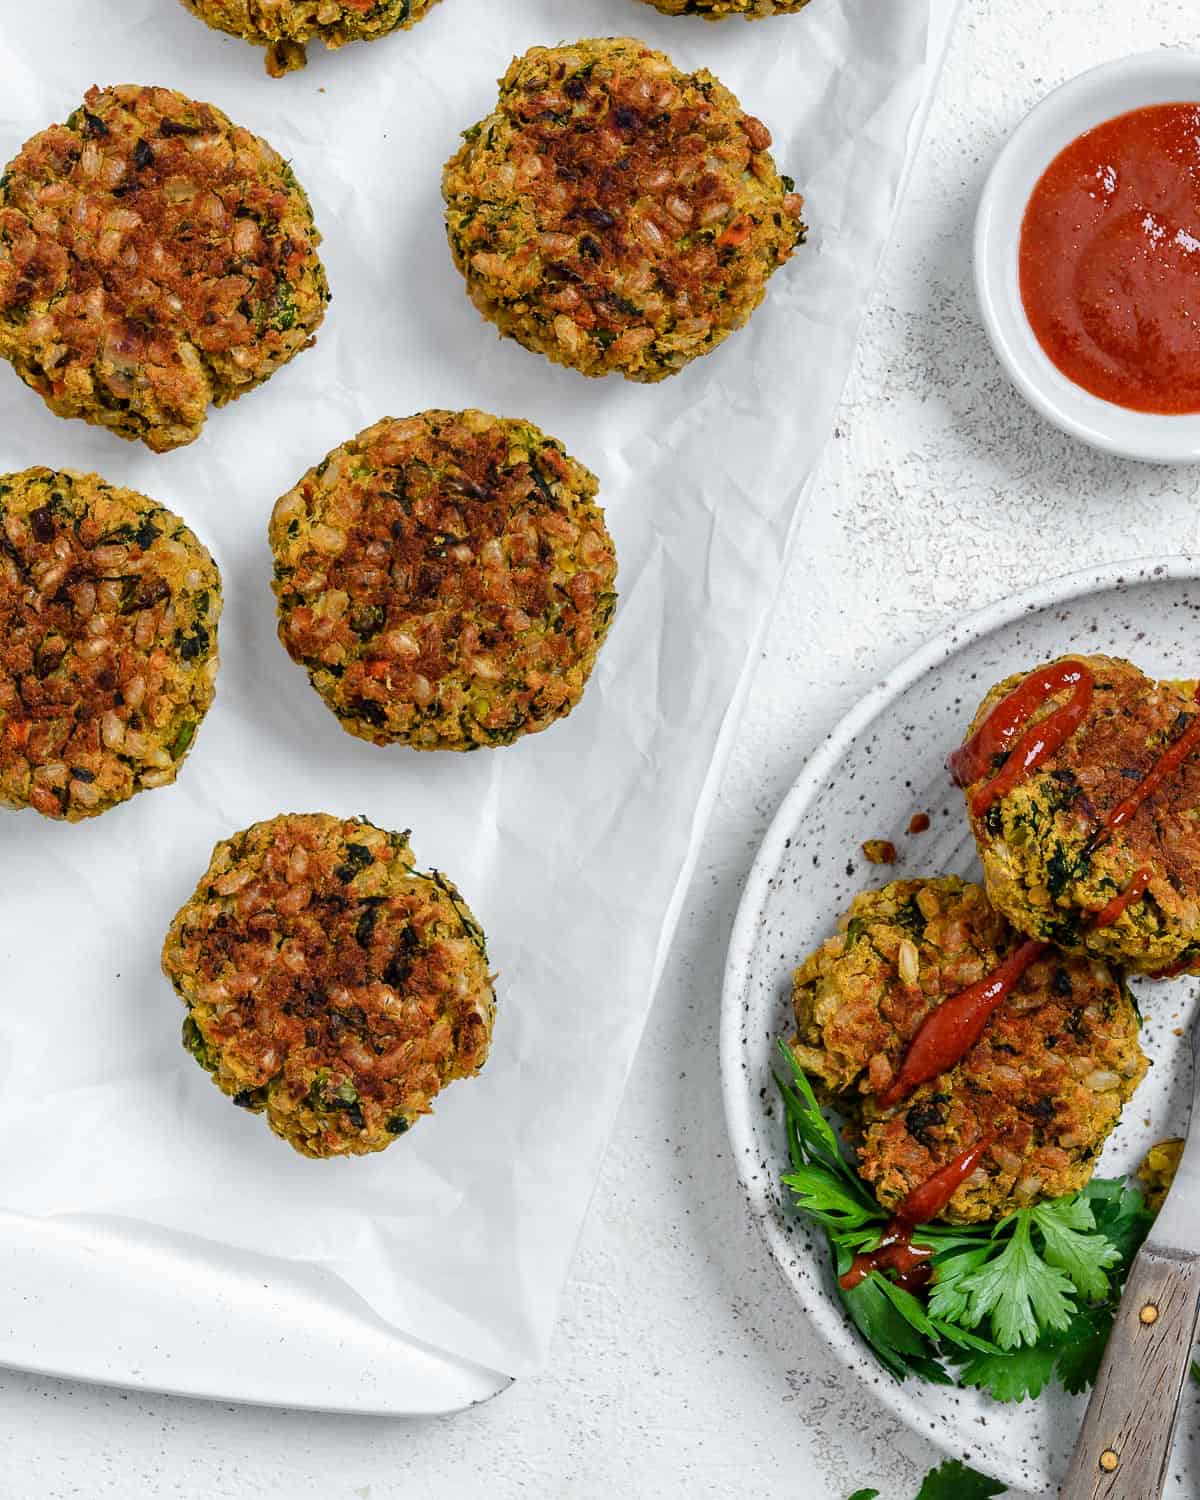 completed Kichari Lentil Patties plated with patties in the background